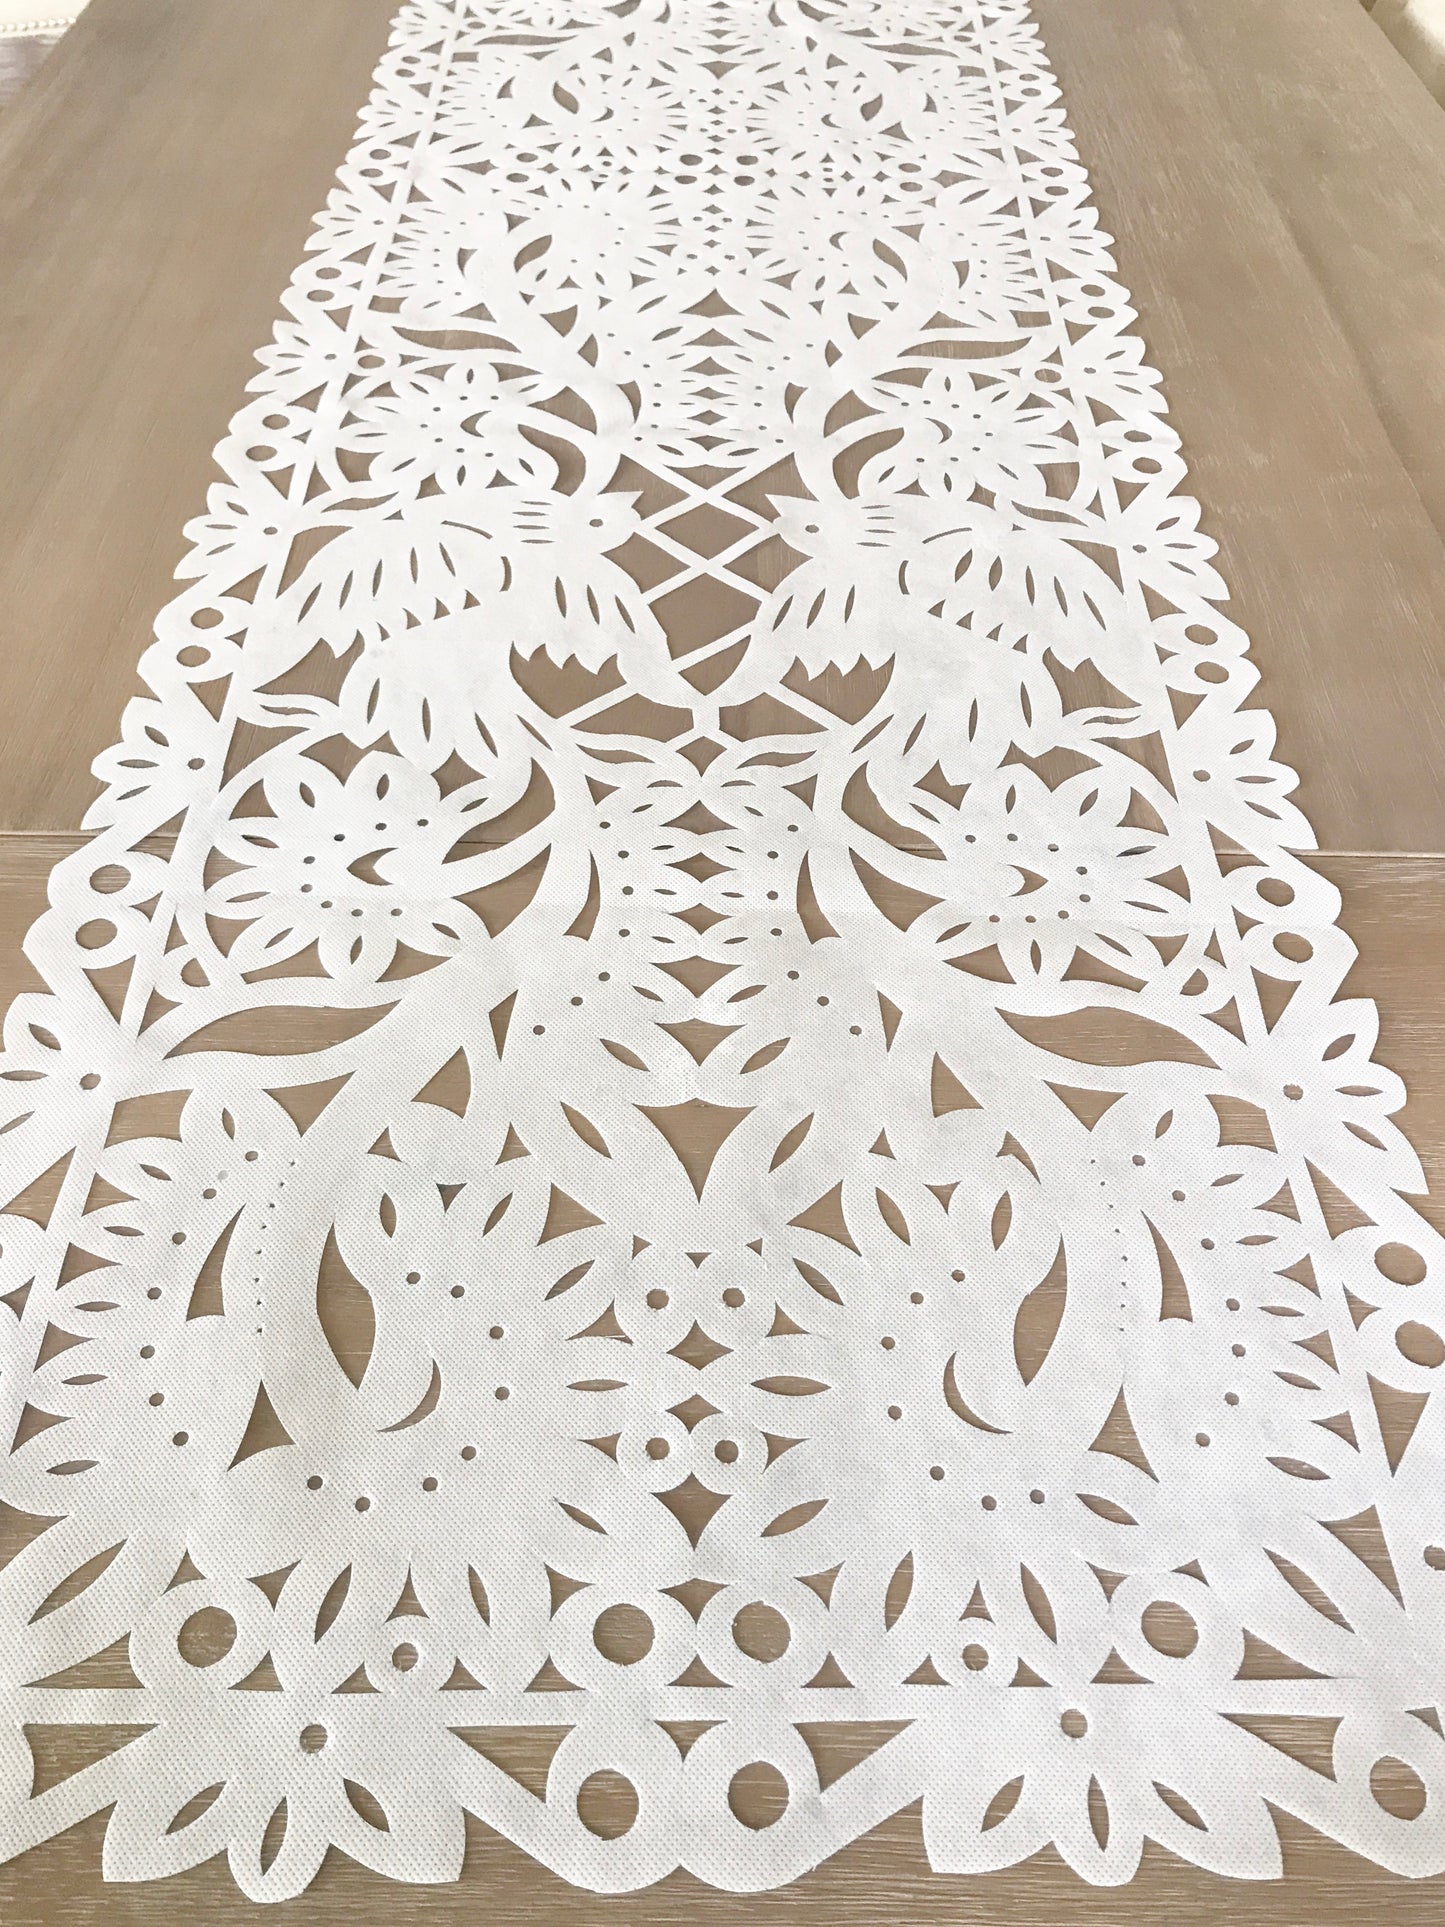 Mexican Papel picado Table Runner in White synthetic Fabric